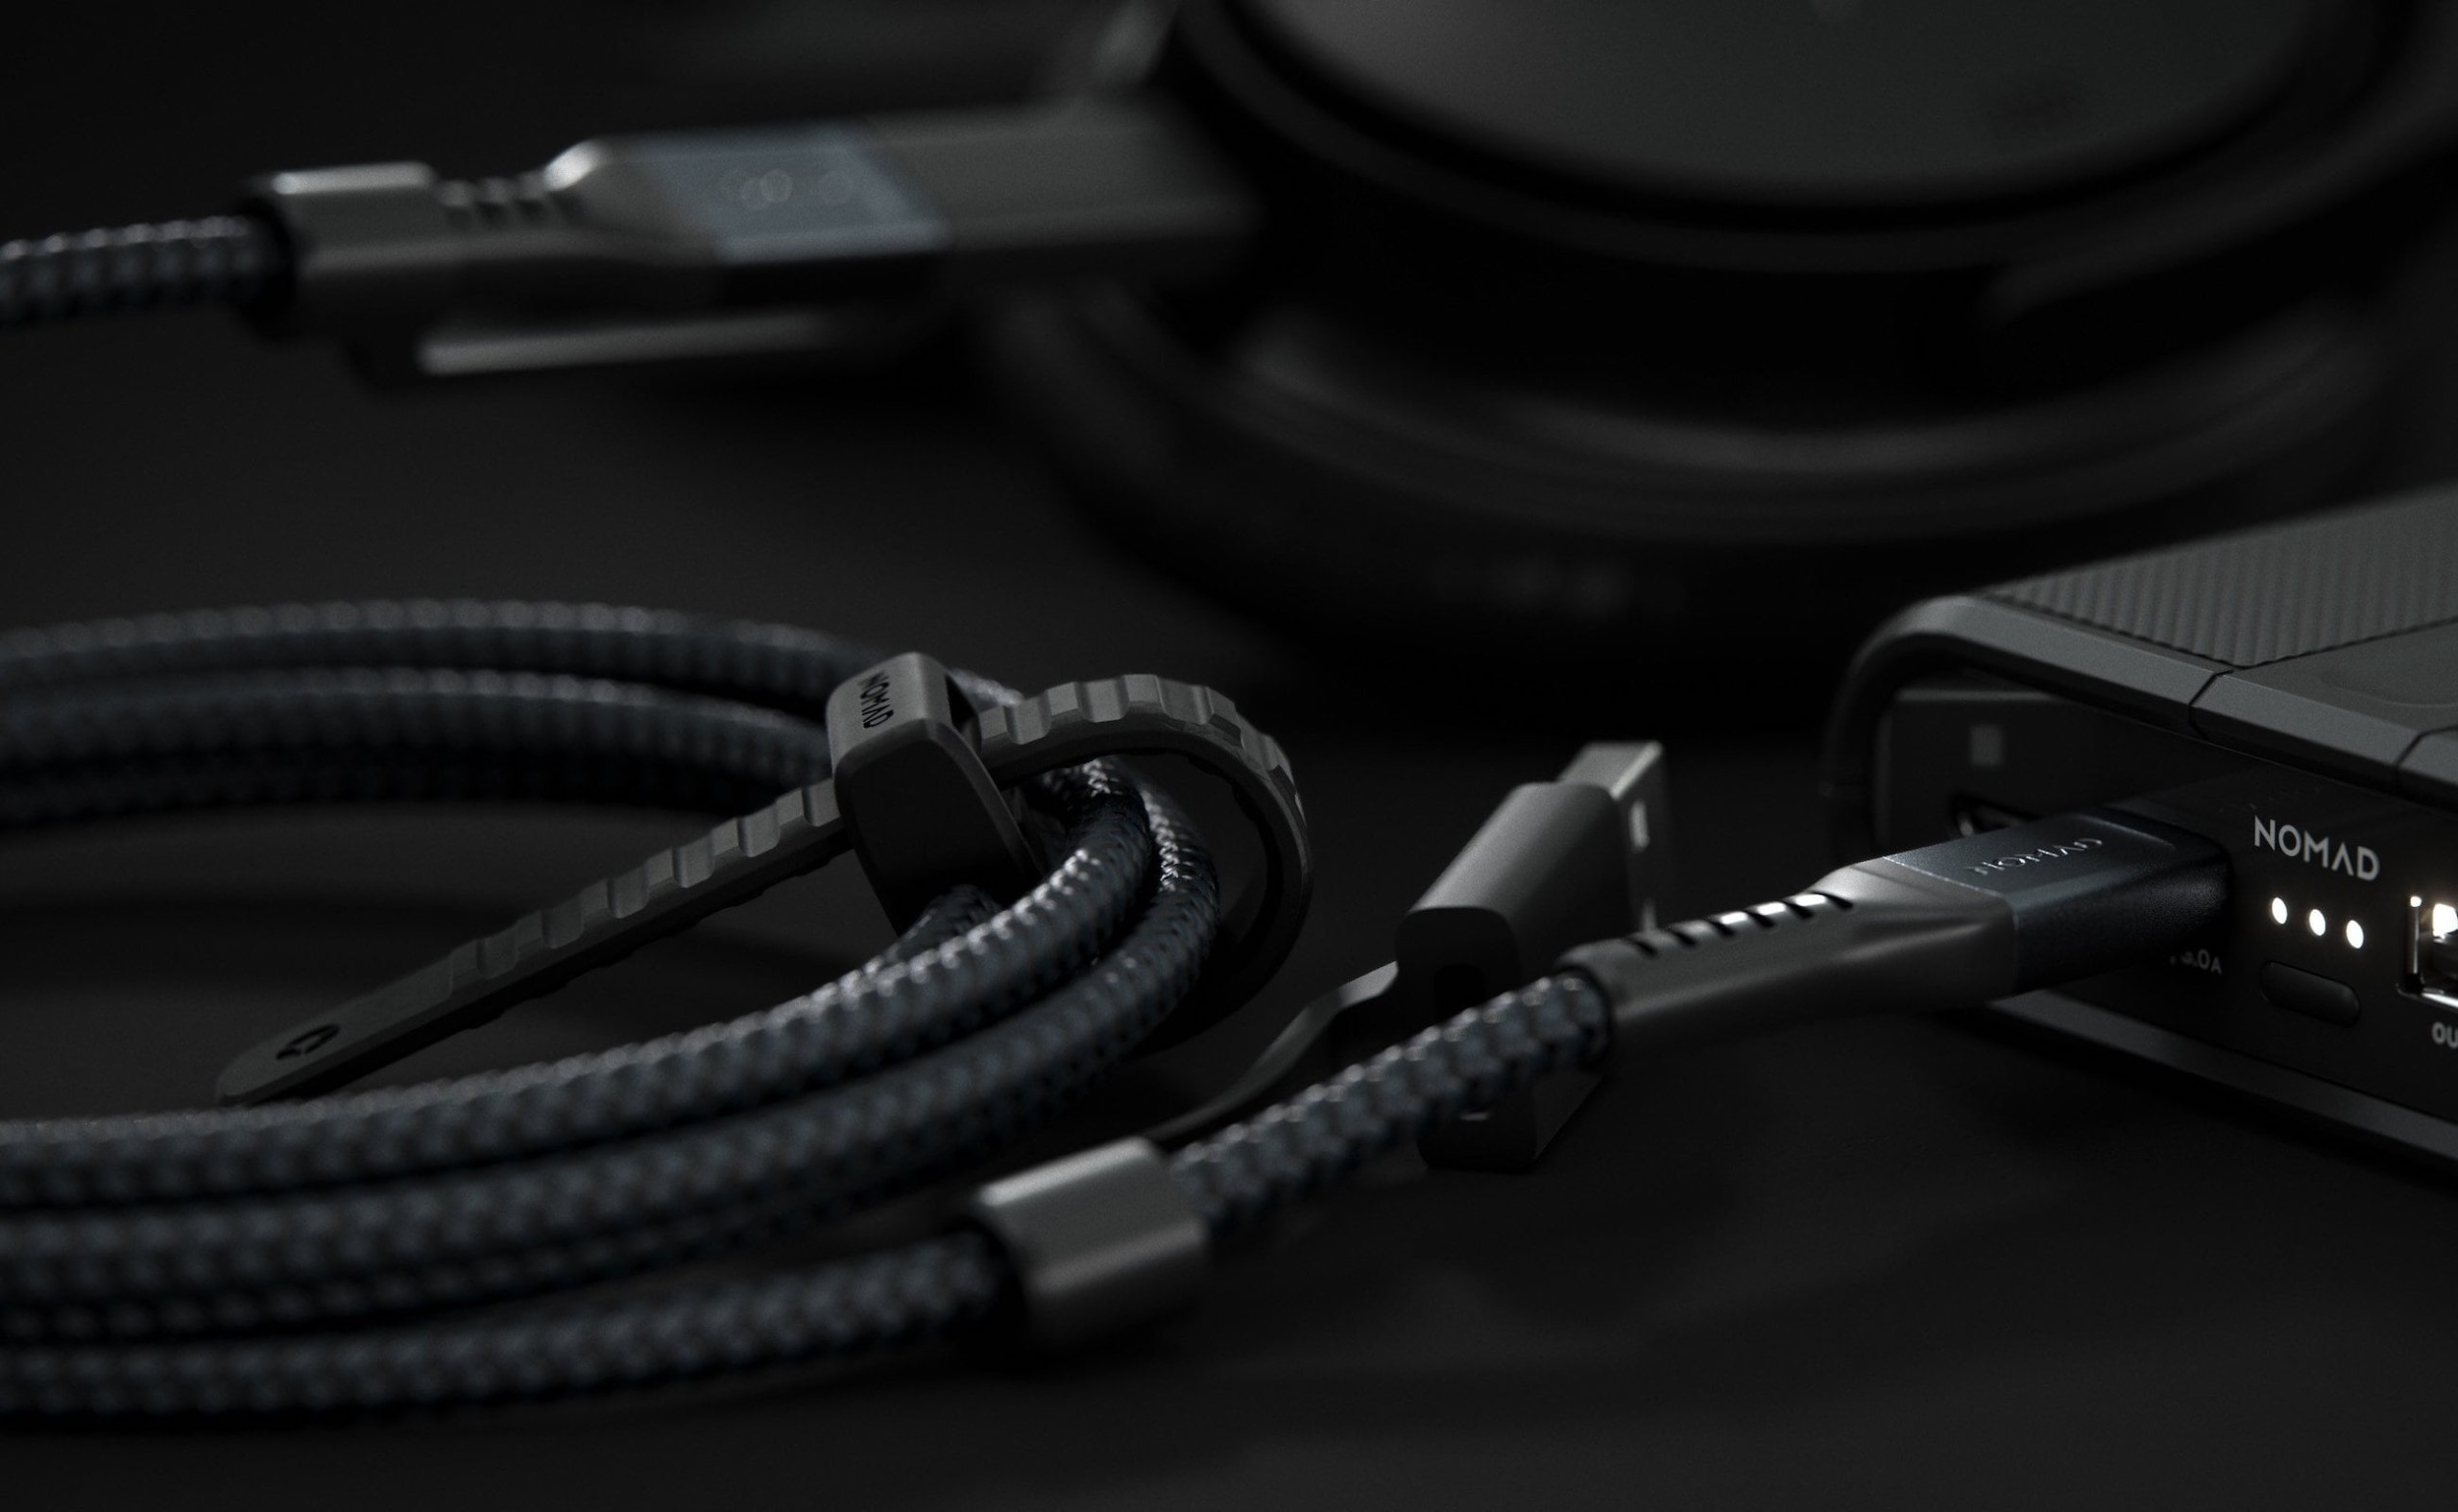 Nomad USB-C Cable Kevlar versatile cord charges all of your USB devices with speed